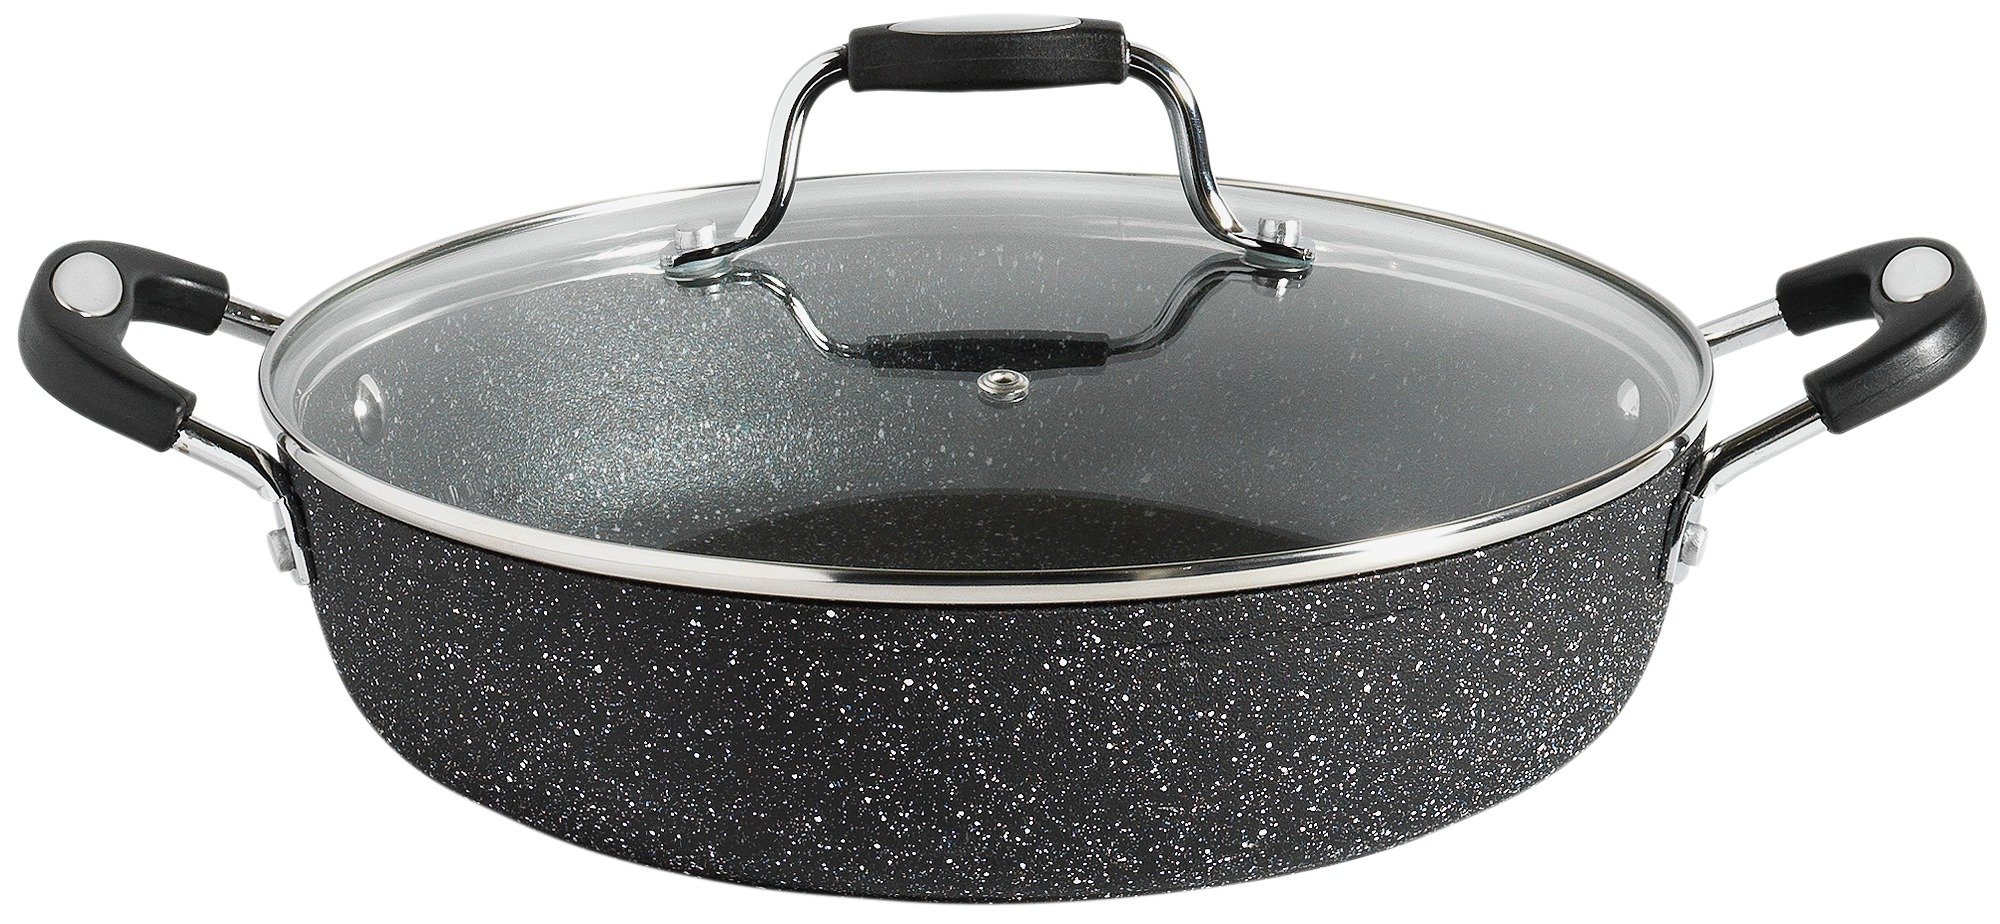 Scoville Shallow Casserole Dish review